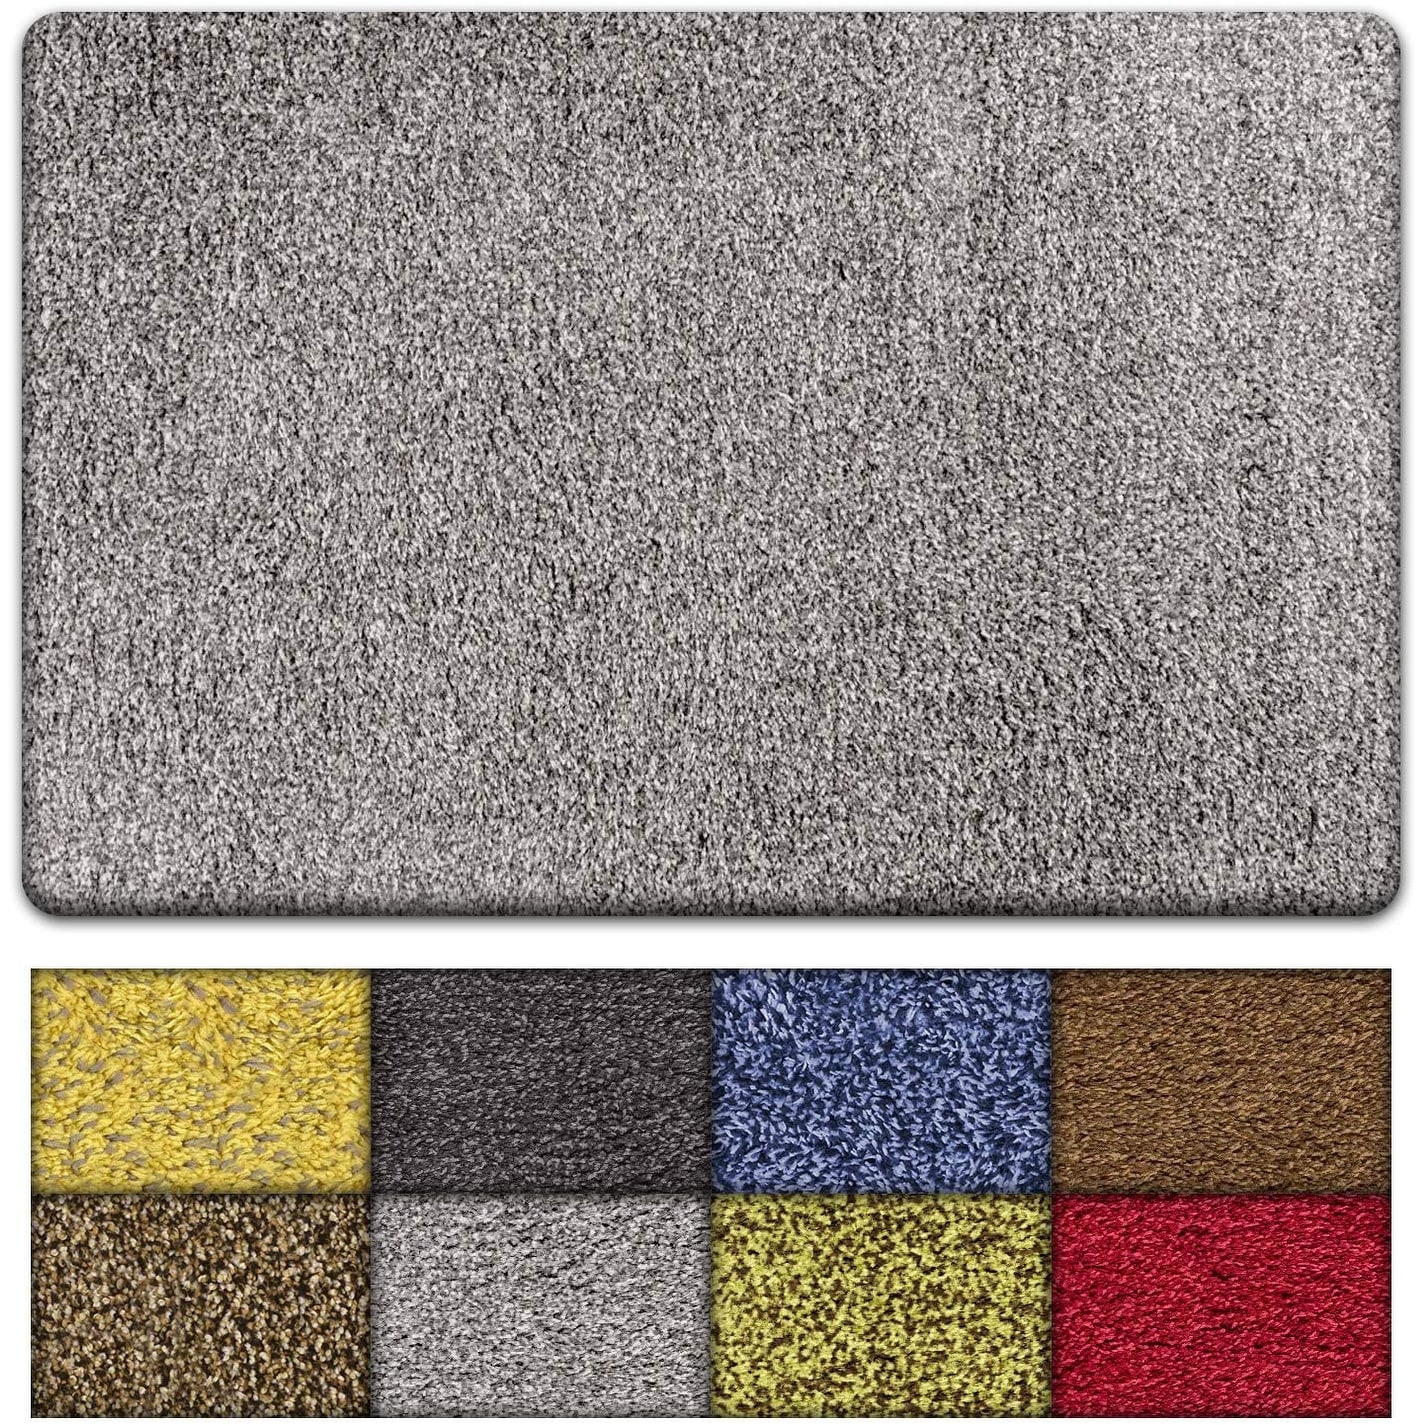 Non-Slip Polyester Indoor Outdoor Entrance Floor Door Mat Rug for Living Room Bedroom Bath Home Decor United States American Map Area Rugs Mat Carpets 39''x20''